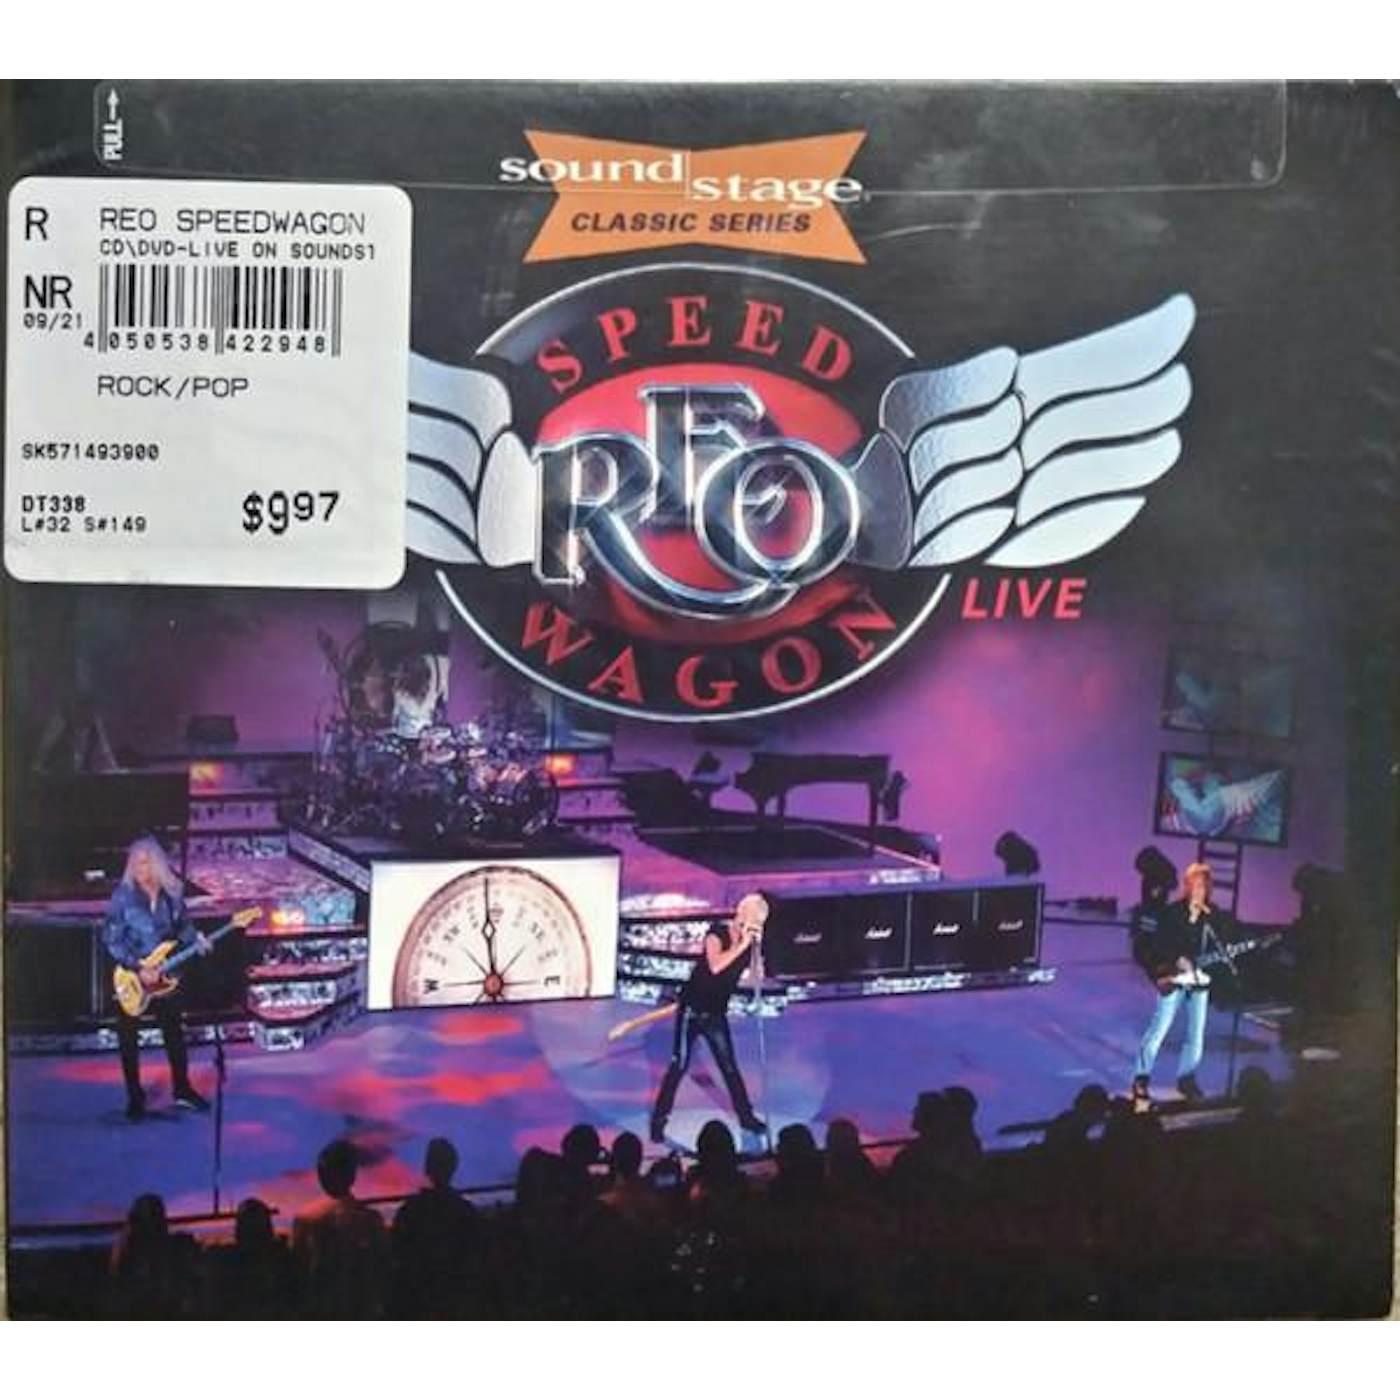 REO Speedwagon LIVE ON SOUNDSTAGE (CLASSIC SERIES) (CD/DVD) CD